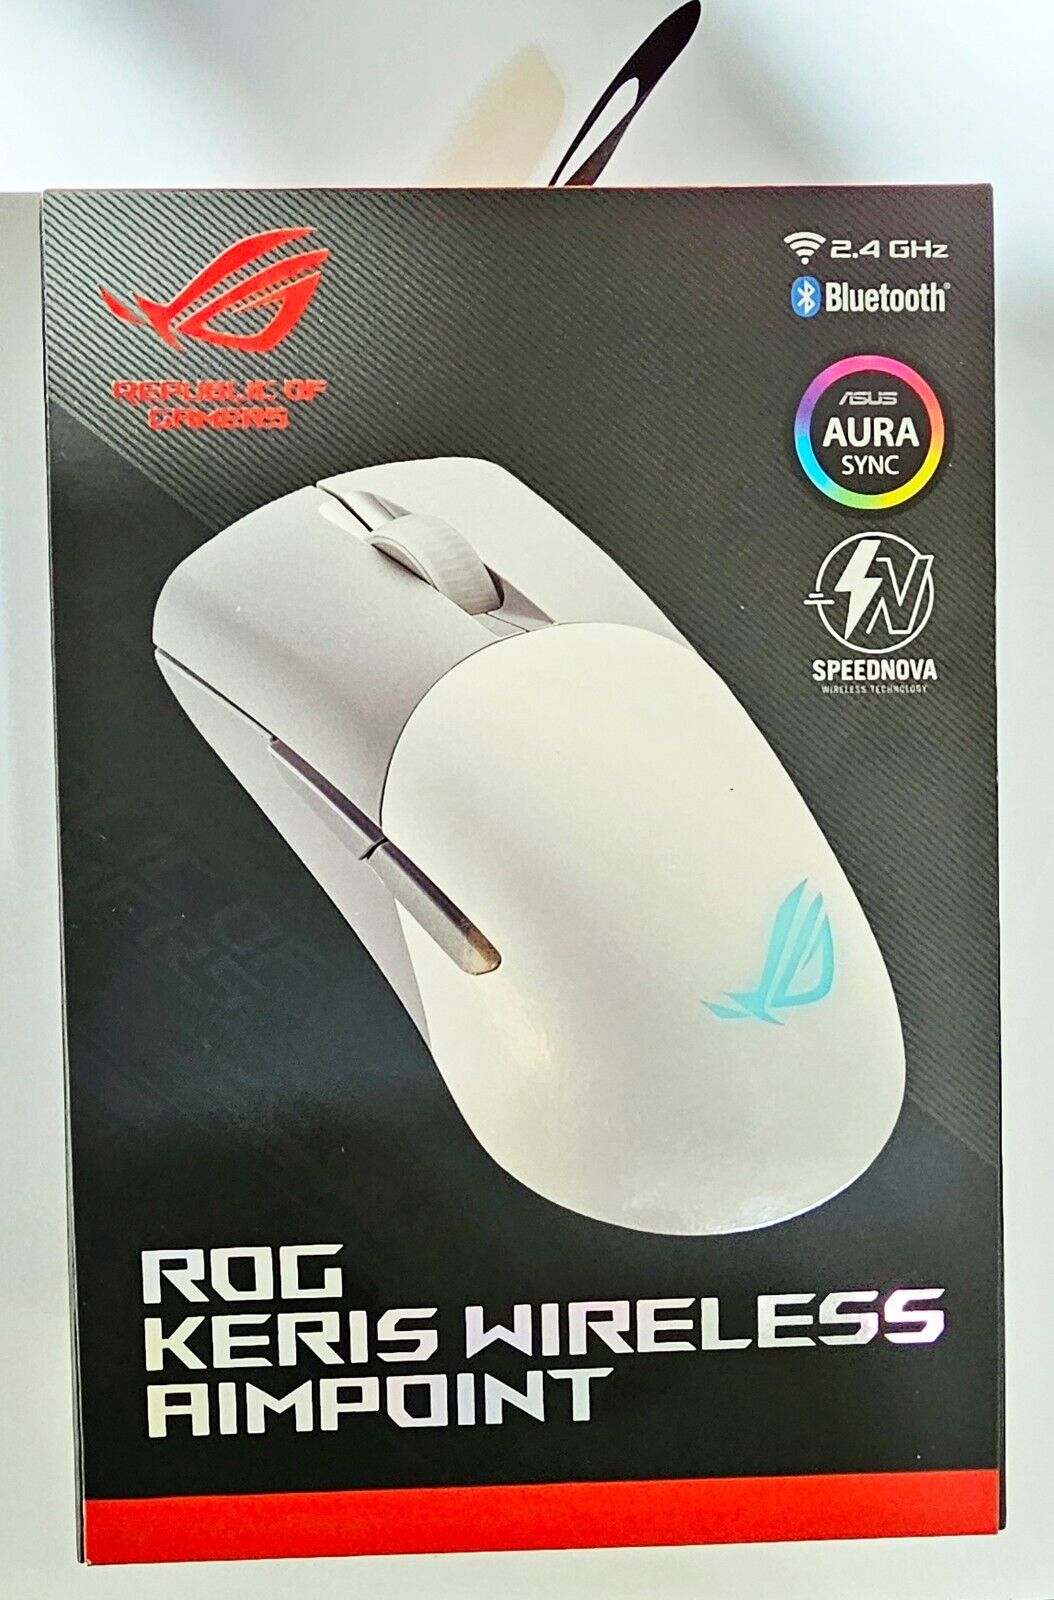 Asus ROG Keris Wireless AimPoint Gaming Mouse - Tri-mode Connectivity - 36000 dp